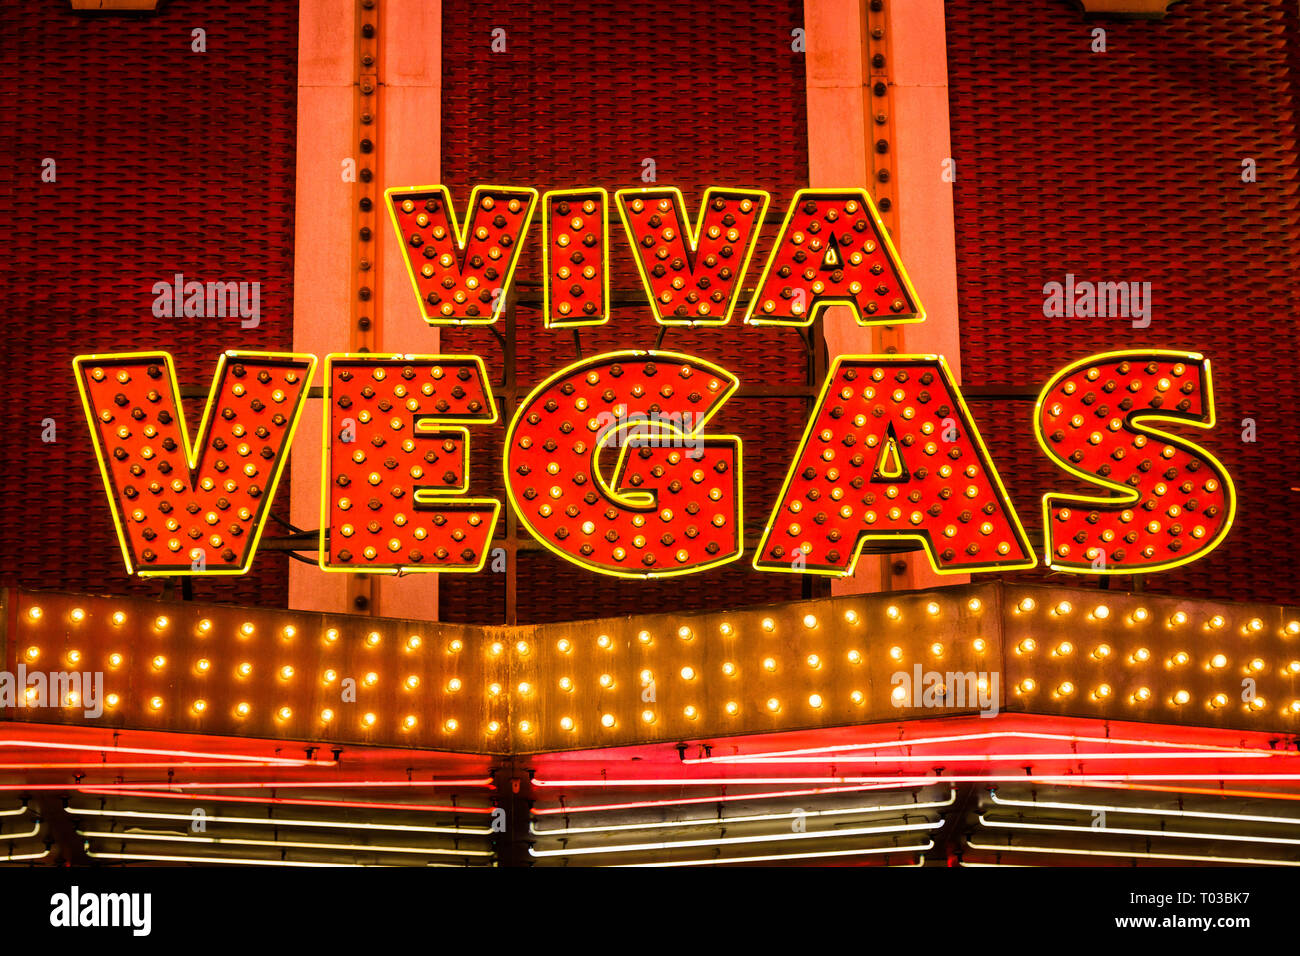 Viva Las Vegas - Neon lights shining brightly in Old Las Vegas or Downtown Las Vegas (one and the same) Stock Photo